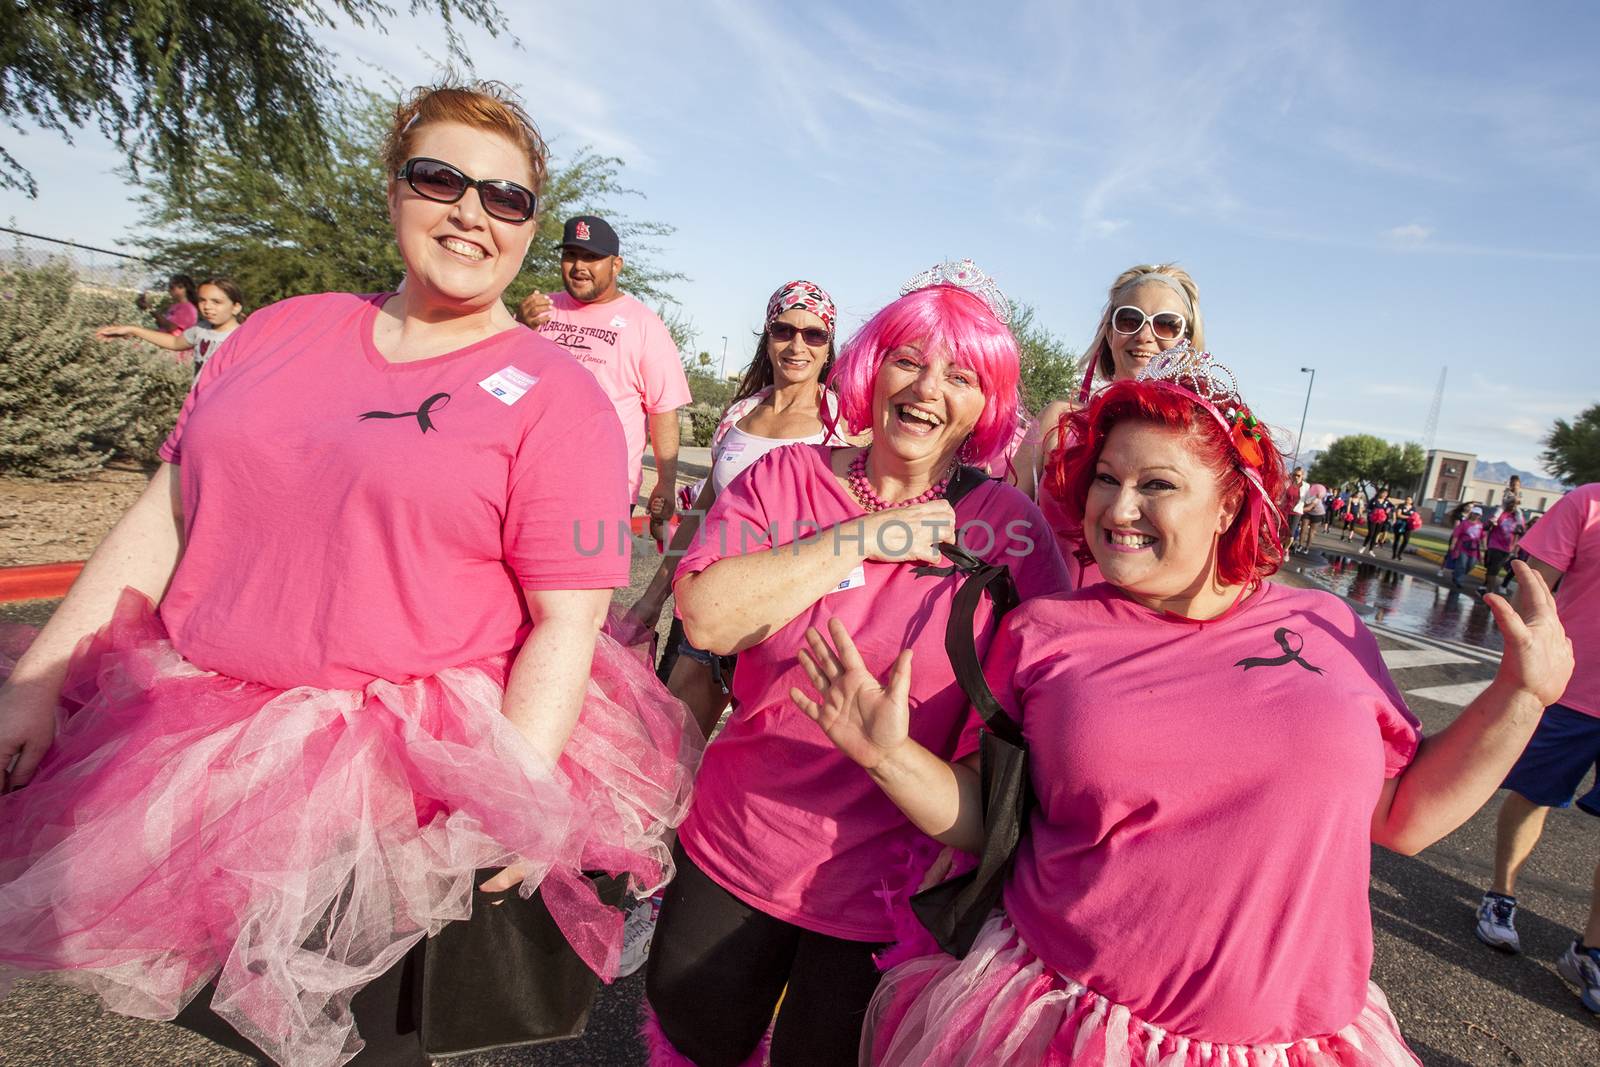 TUCSON, PIMA COUNTY, ARIZONA, USA - OCTOBER 18:  Unidentified women smiling and posing in the 2015 American Cancer Society Making Strides Against Breast Cancer walk, on October 18, 2015 in Tucson, Arizona, USA.